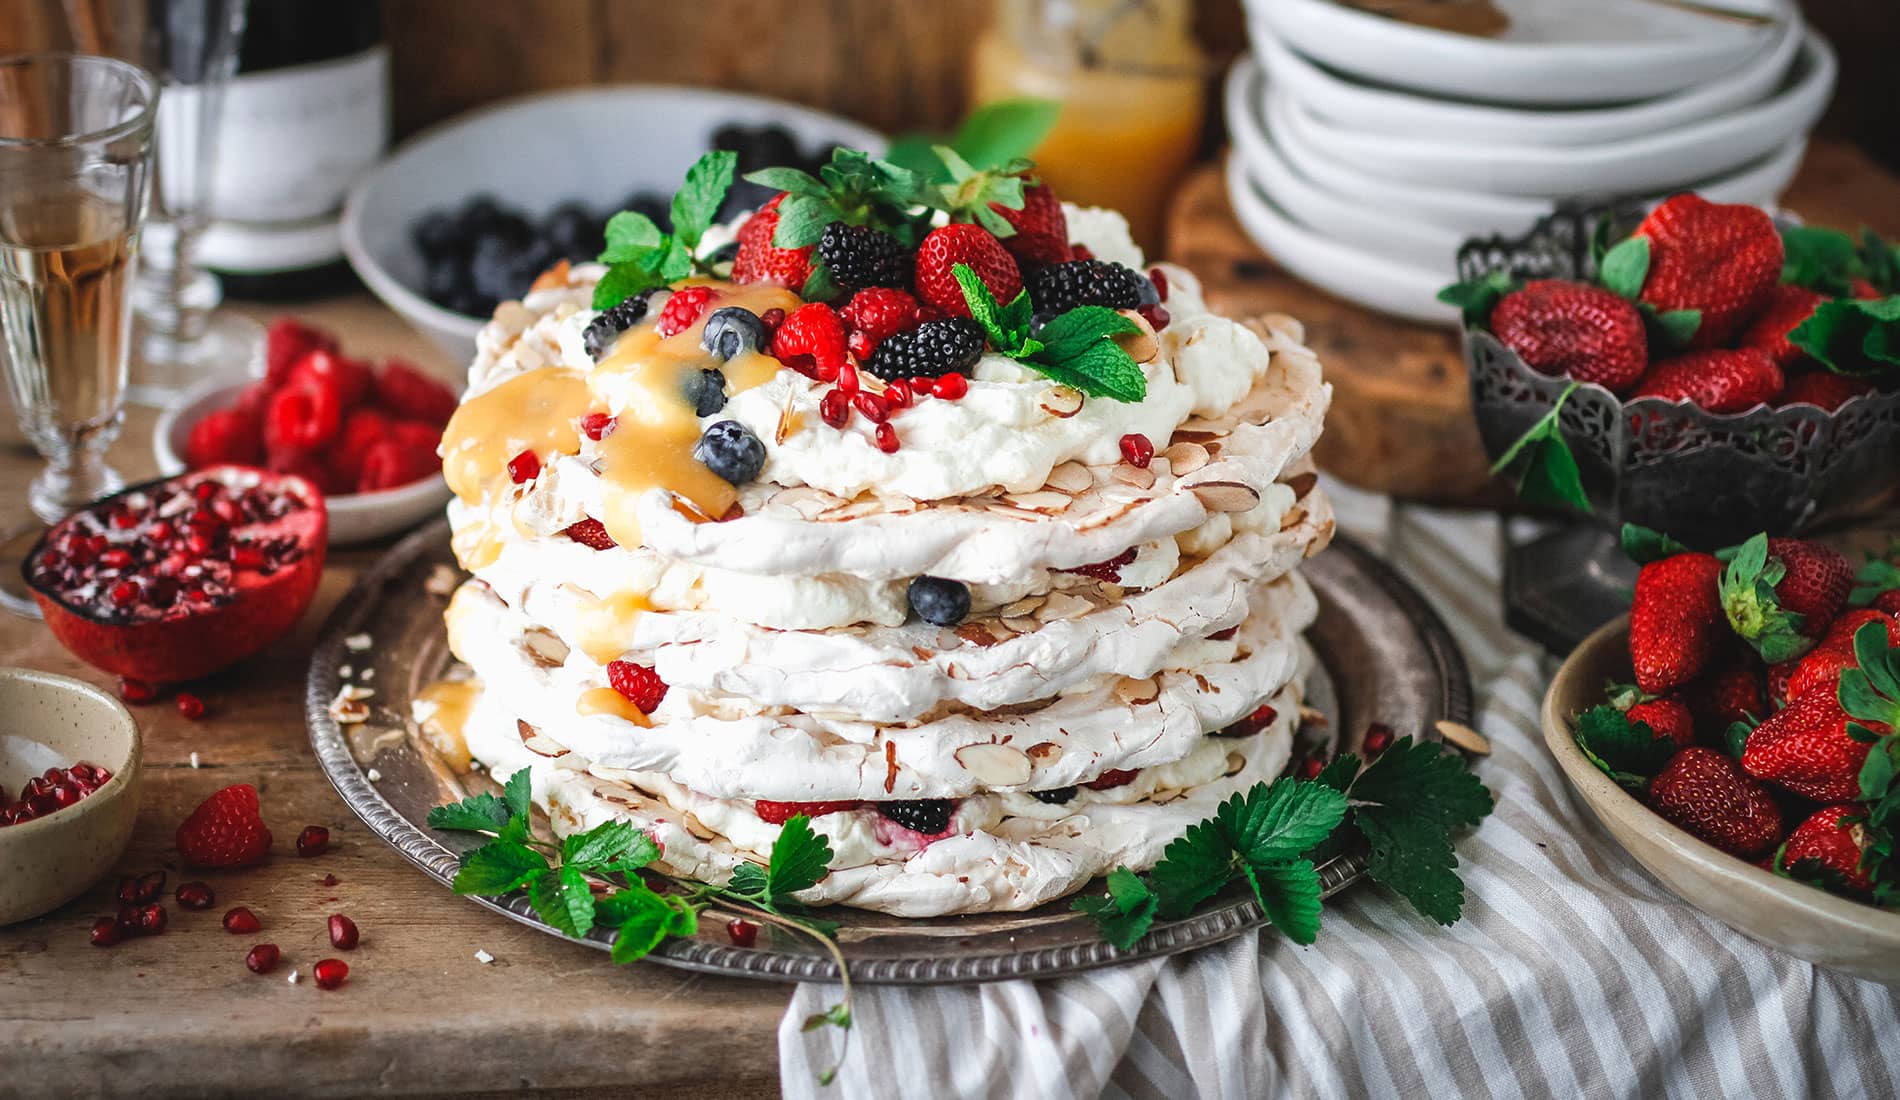 A layered meringue cake with fresh fruit and flaked almonds, and a bottle of Cloudy Bay Pelorus sparkling wine.